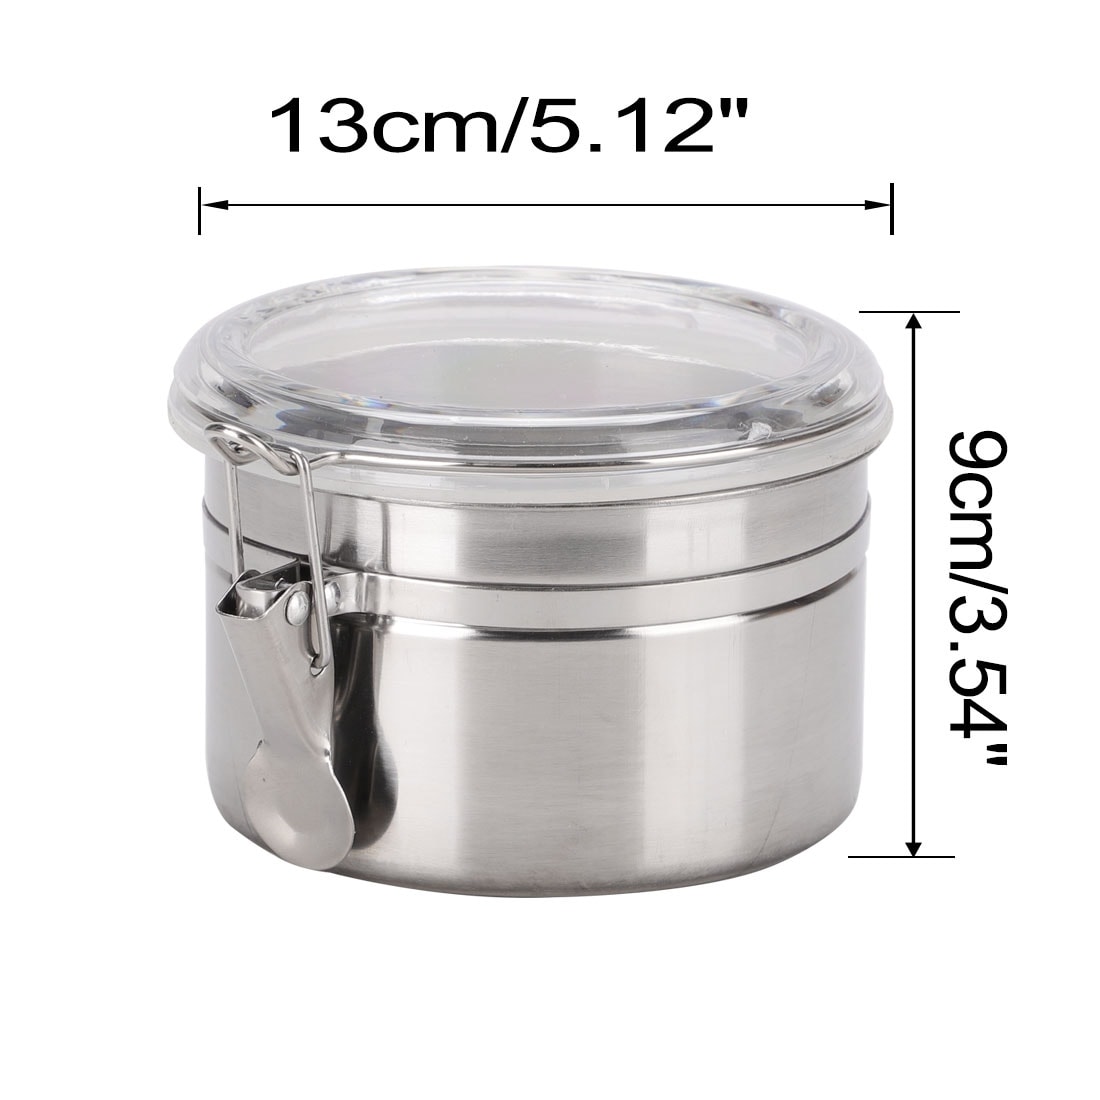 https://ak1.ostkcdn.com/images/products/is/images/direct/4810ce526b58d2a16be426ed95b60e0f4c957d7c/Stainless-Steel-Airtight-Canister-Food-Container.jpg